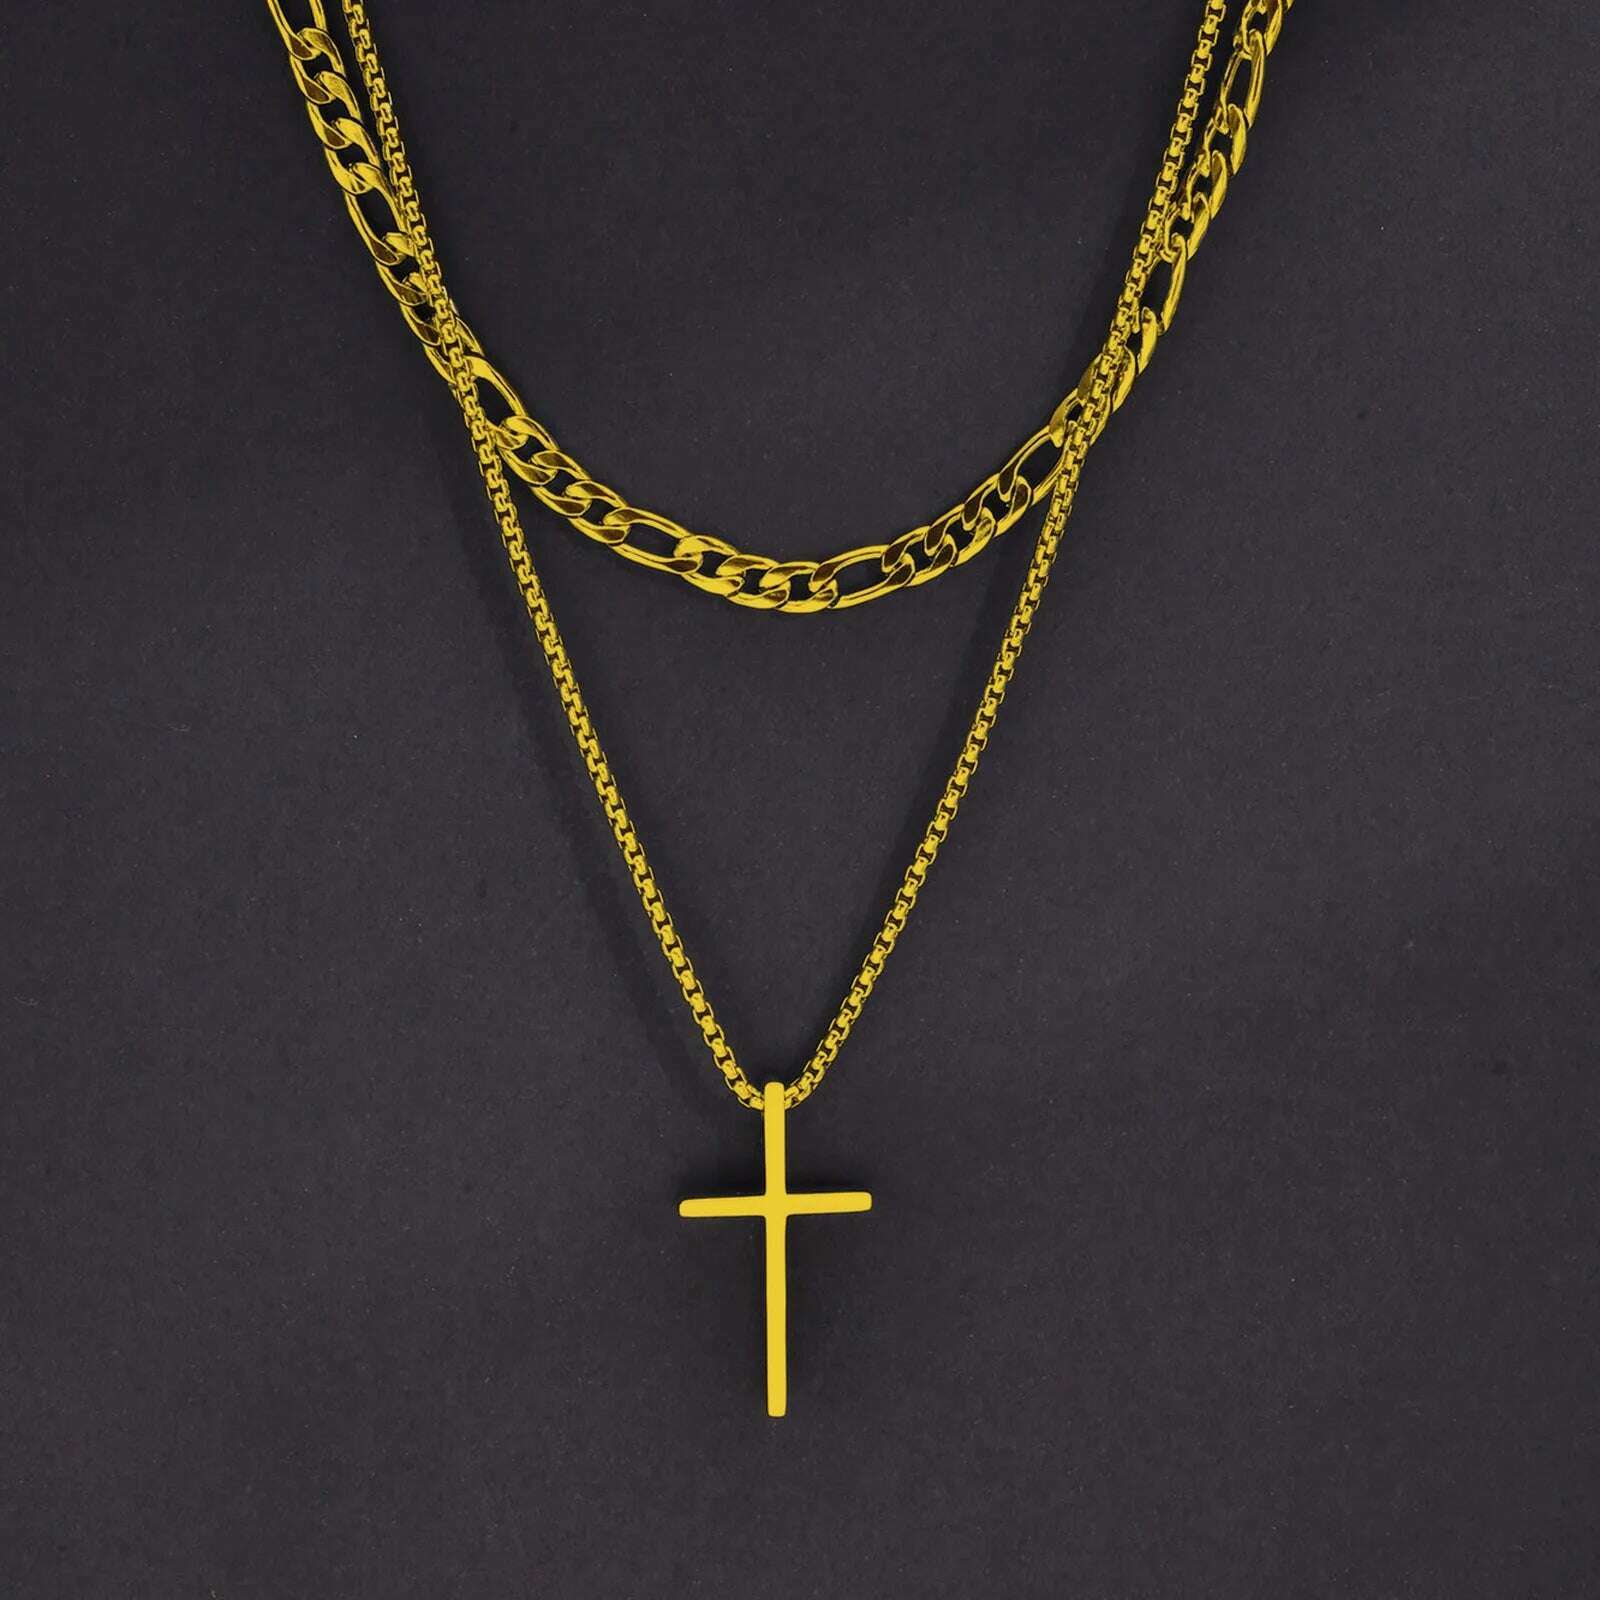 KIMLUD, Vnox Mens Cross Necklaces, Stainless Steel Layered Plain Cross Pendant, Rope Box Chain Necklace, Simple Prayer Jesus Collar, NC-1035G NC-158-50G, KIMLUD Women's Clothes